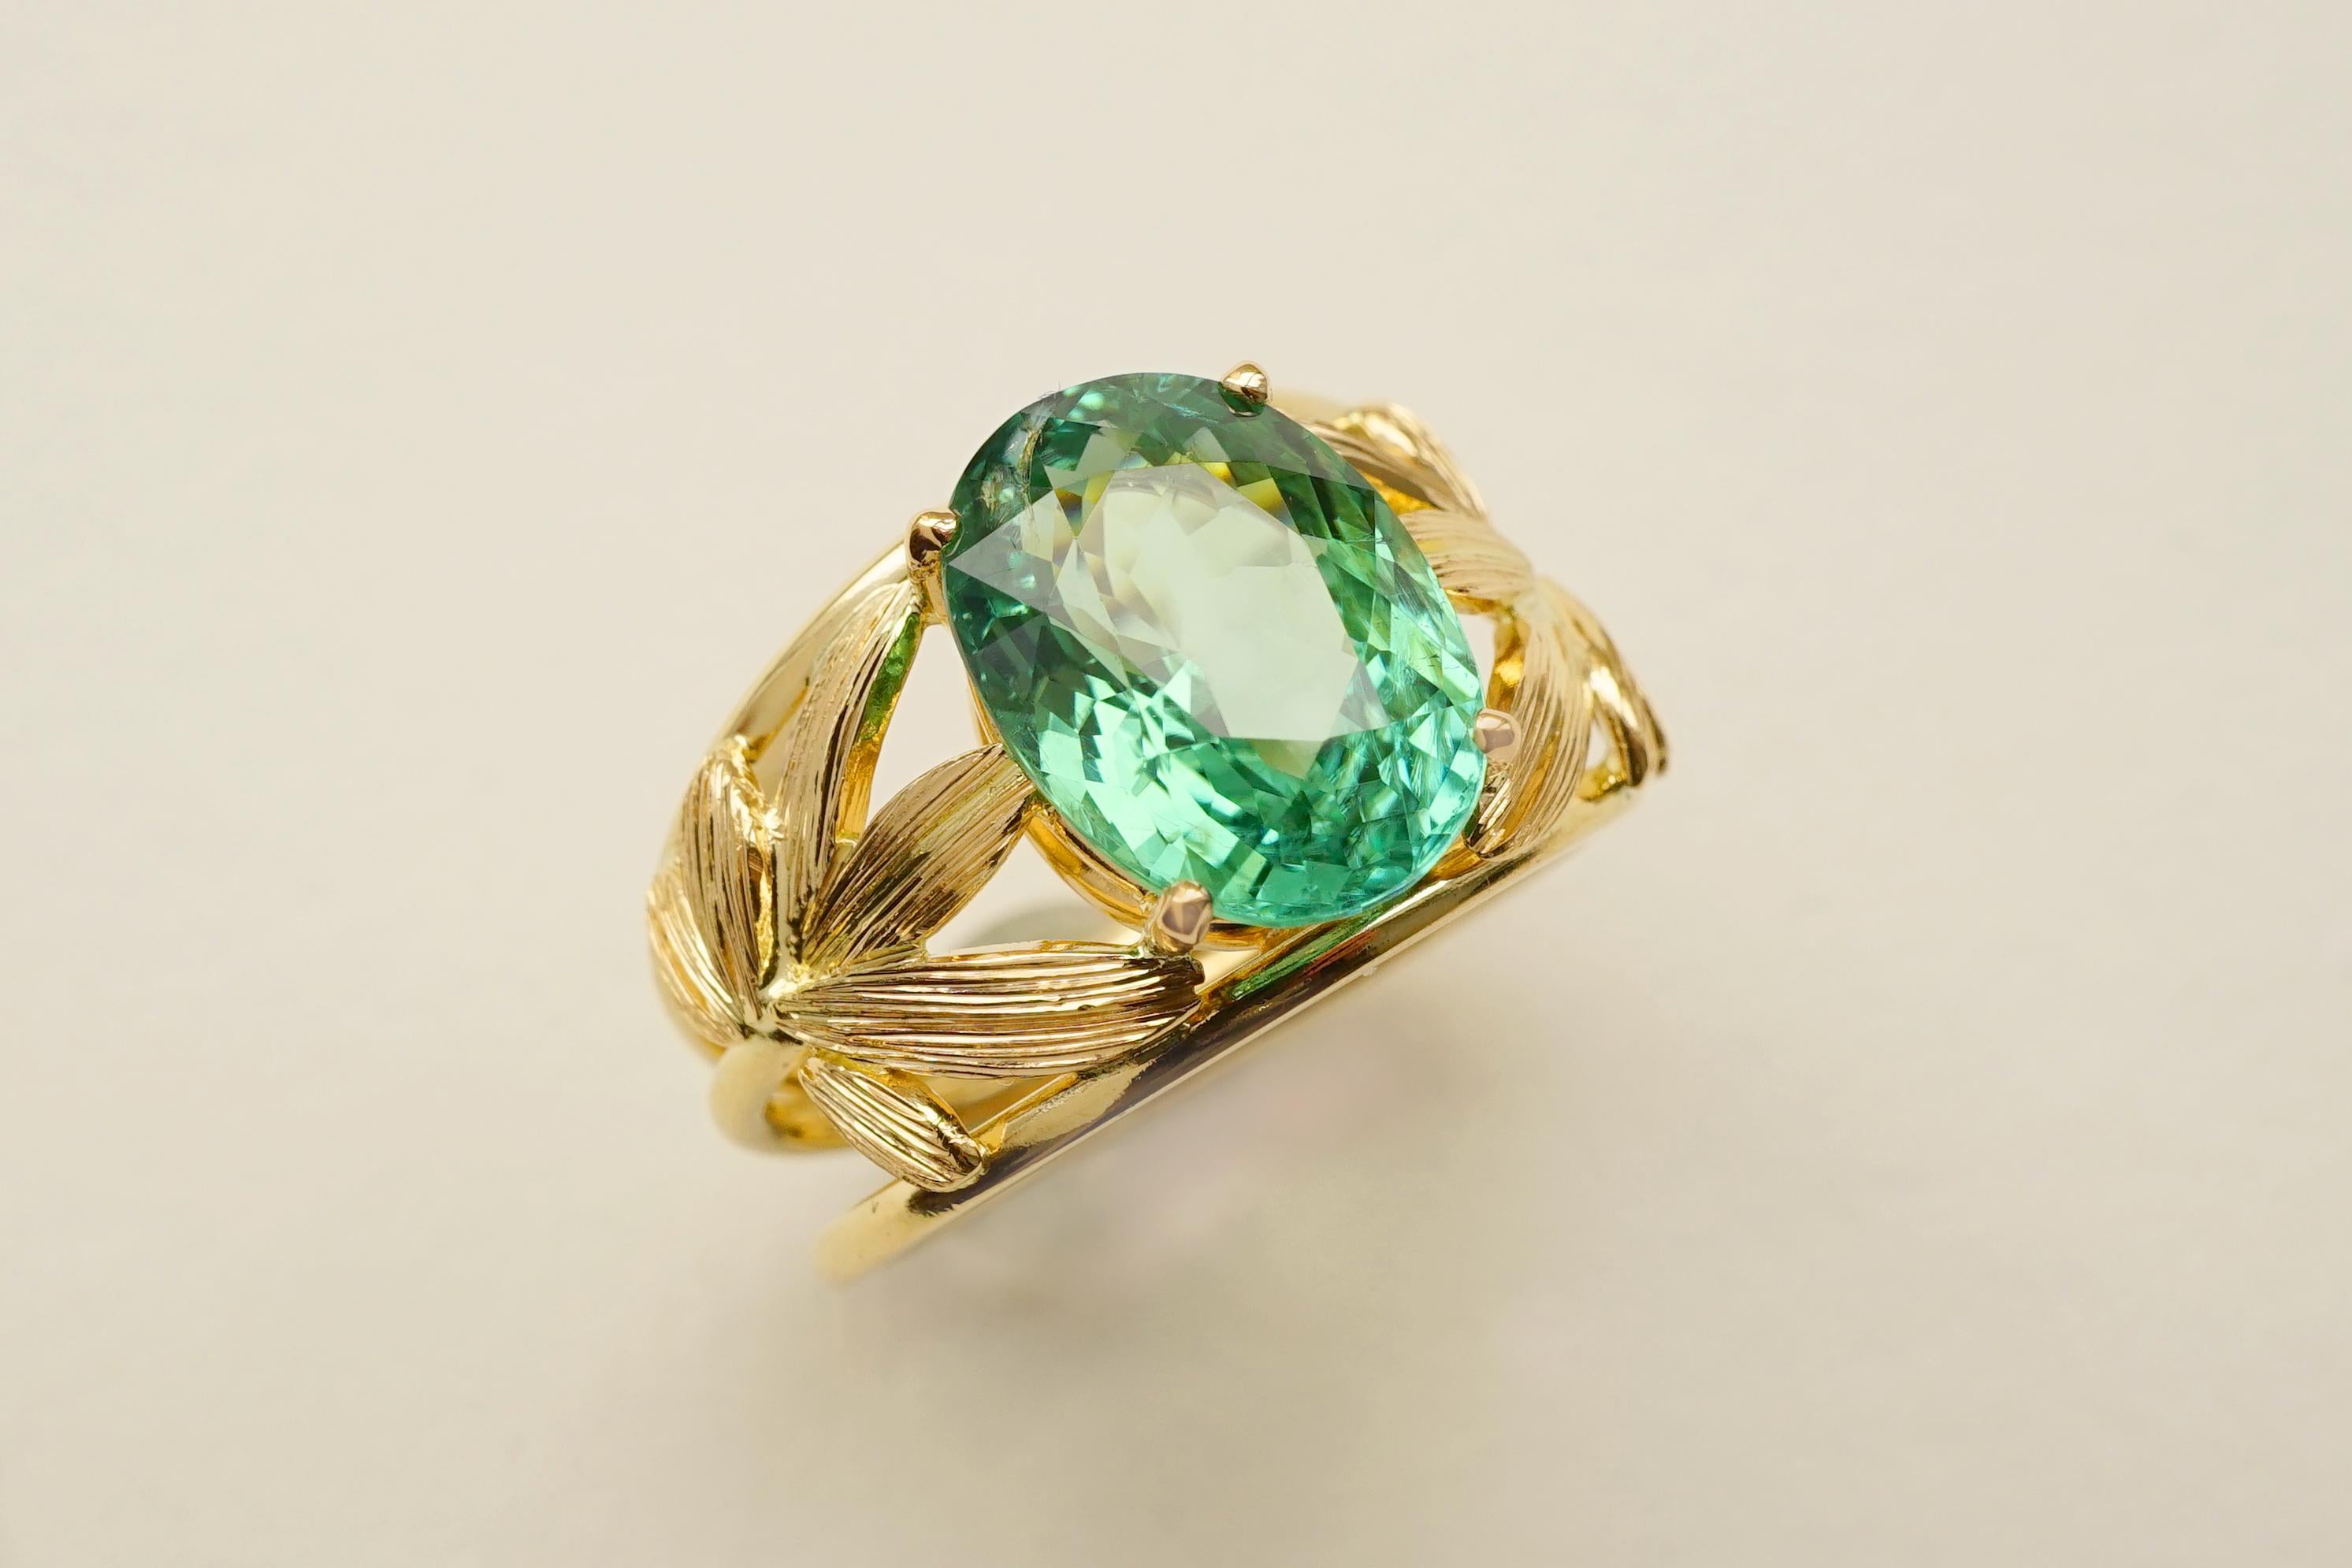 Coralie Van Caloen Yellow Gold 18k Palm Leaves Paraiba Tourmaline Cocktail Ring is entirely hand made and forged in Belgium by experts goldsmiths therefore it is a very unique piece. The colour of the Paraiba Tourmaline is as bright and luminous as